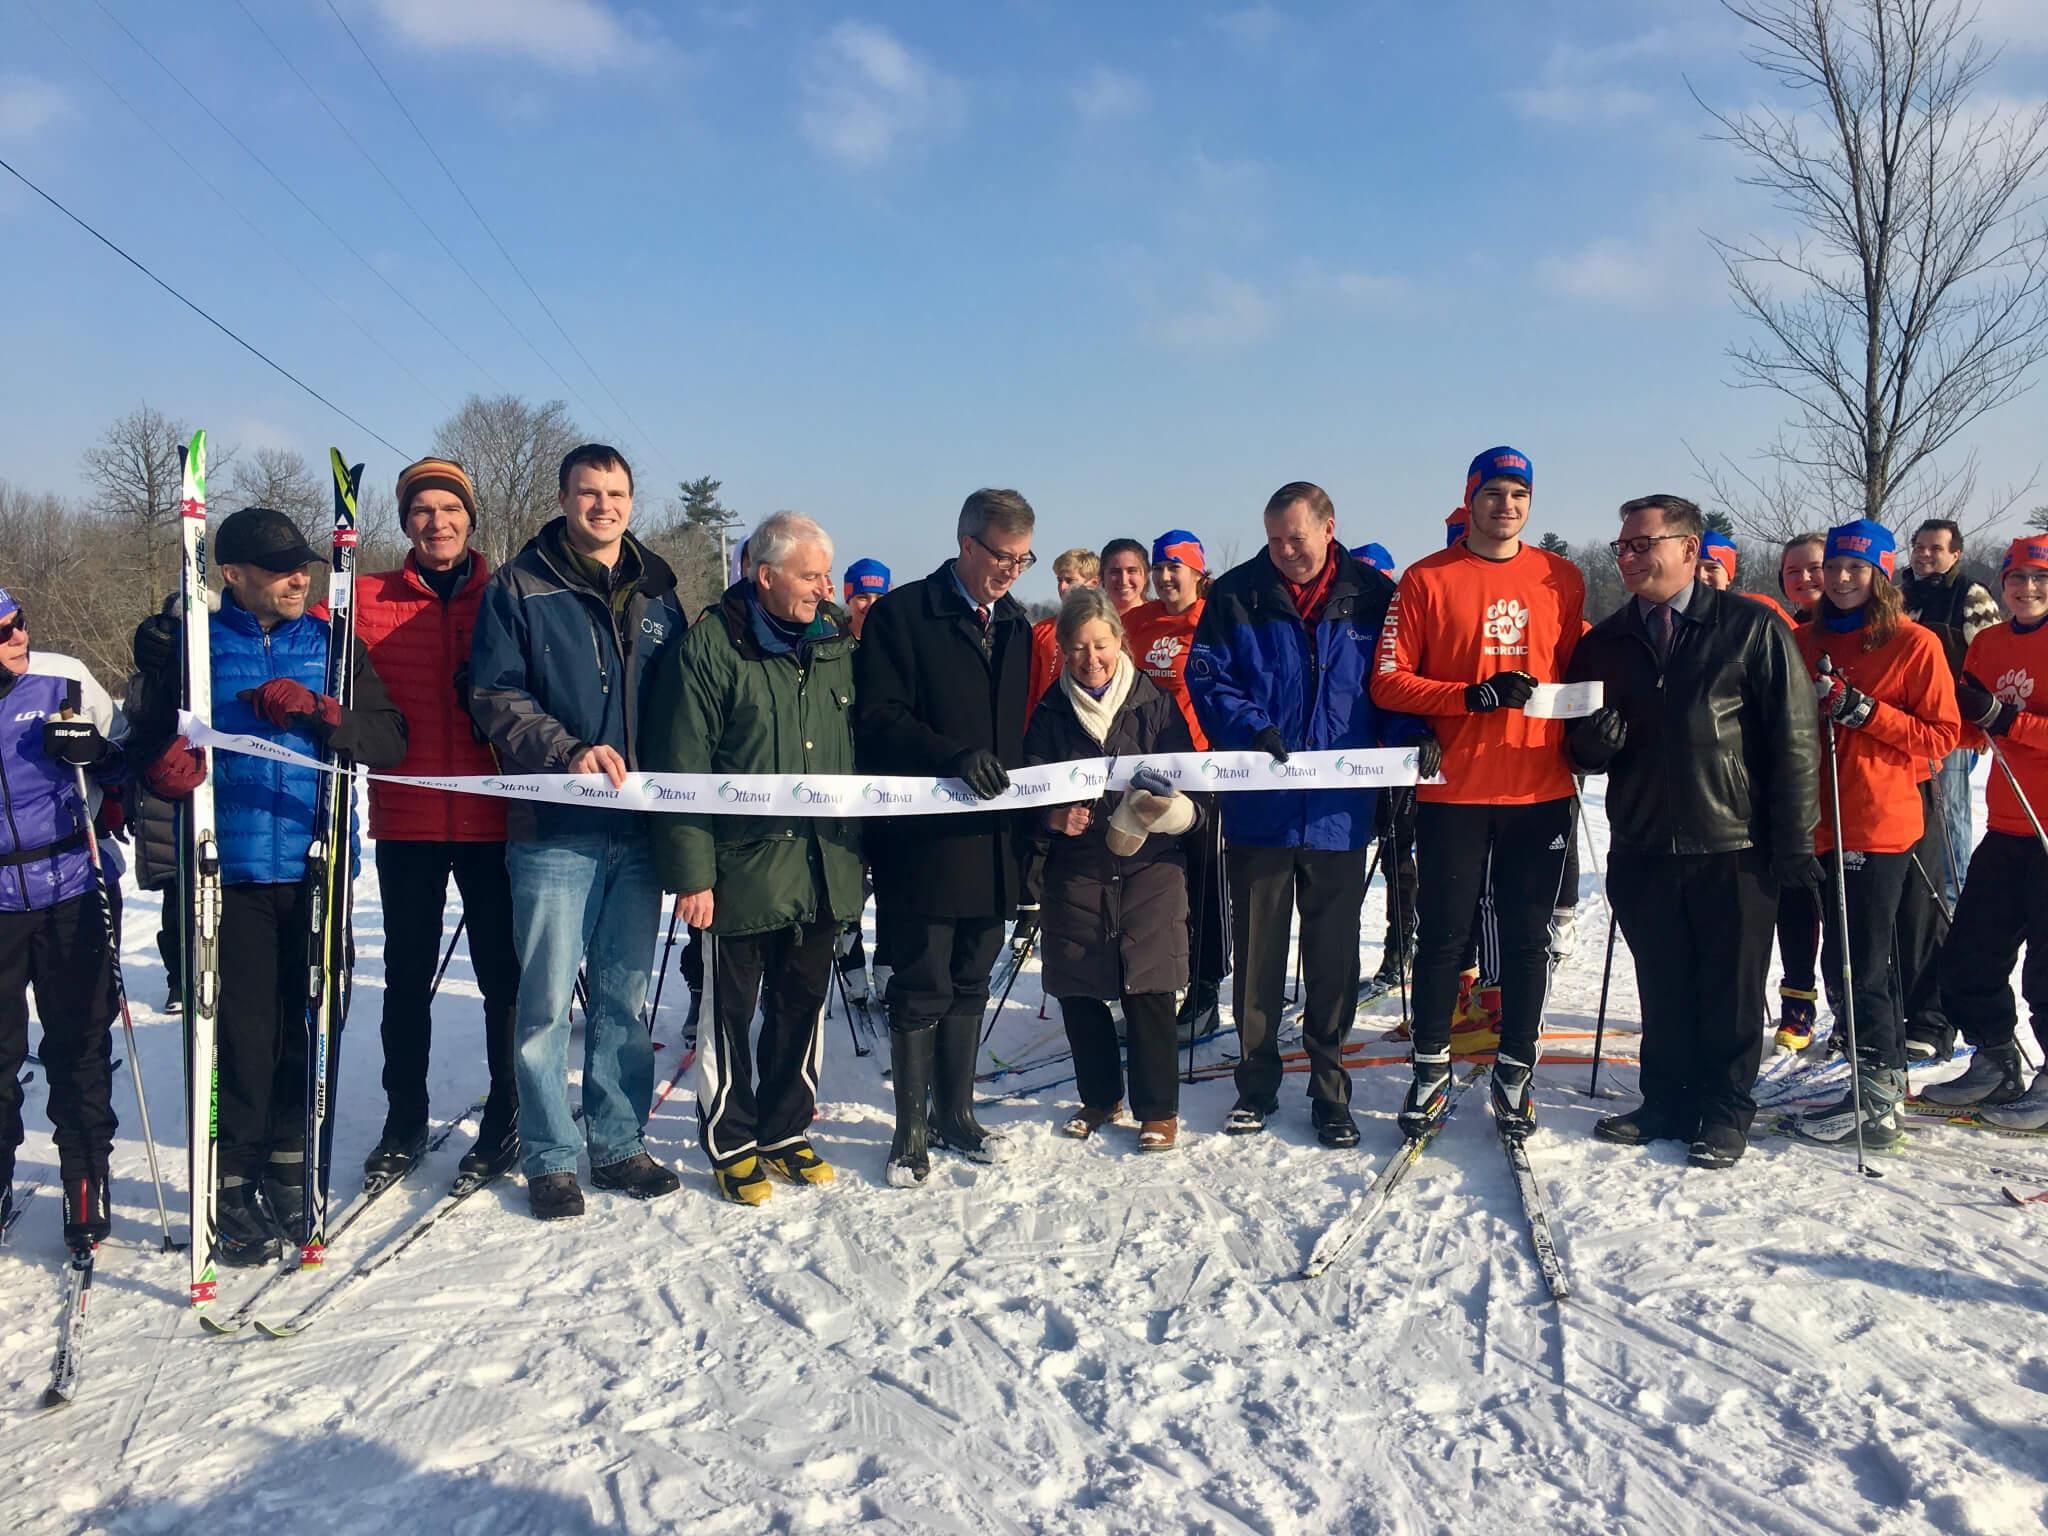 The opening of the Ski Heritage East winter trail in January 2018.